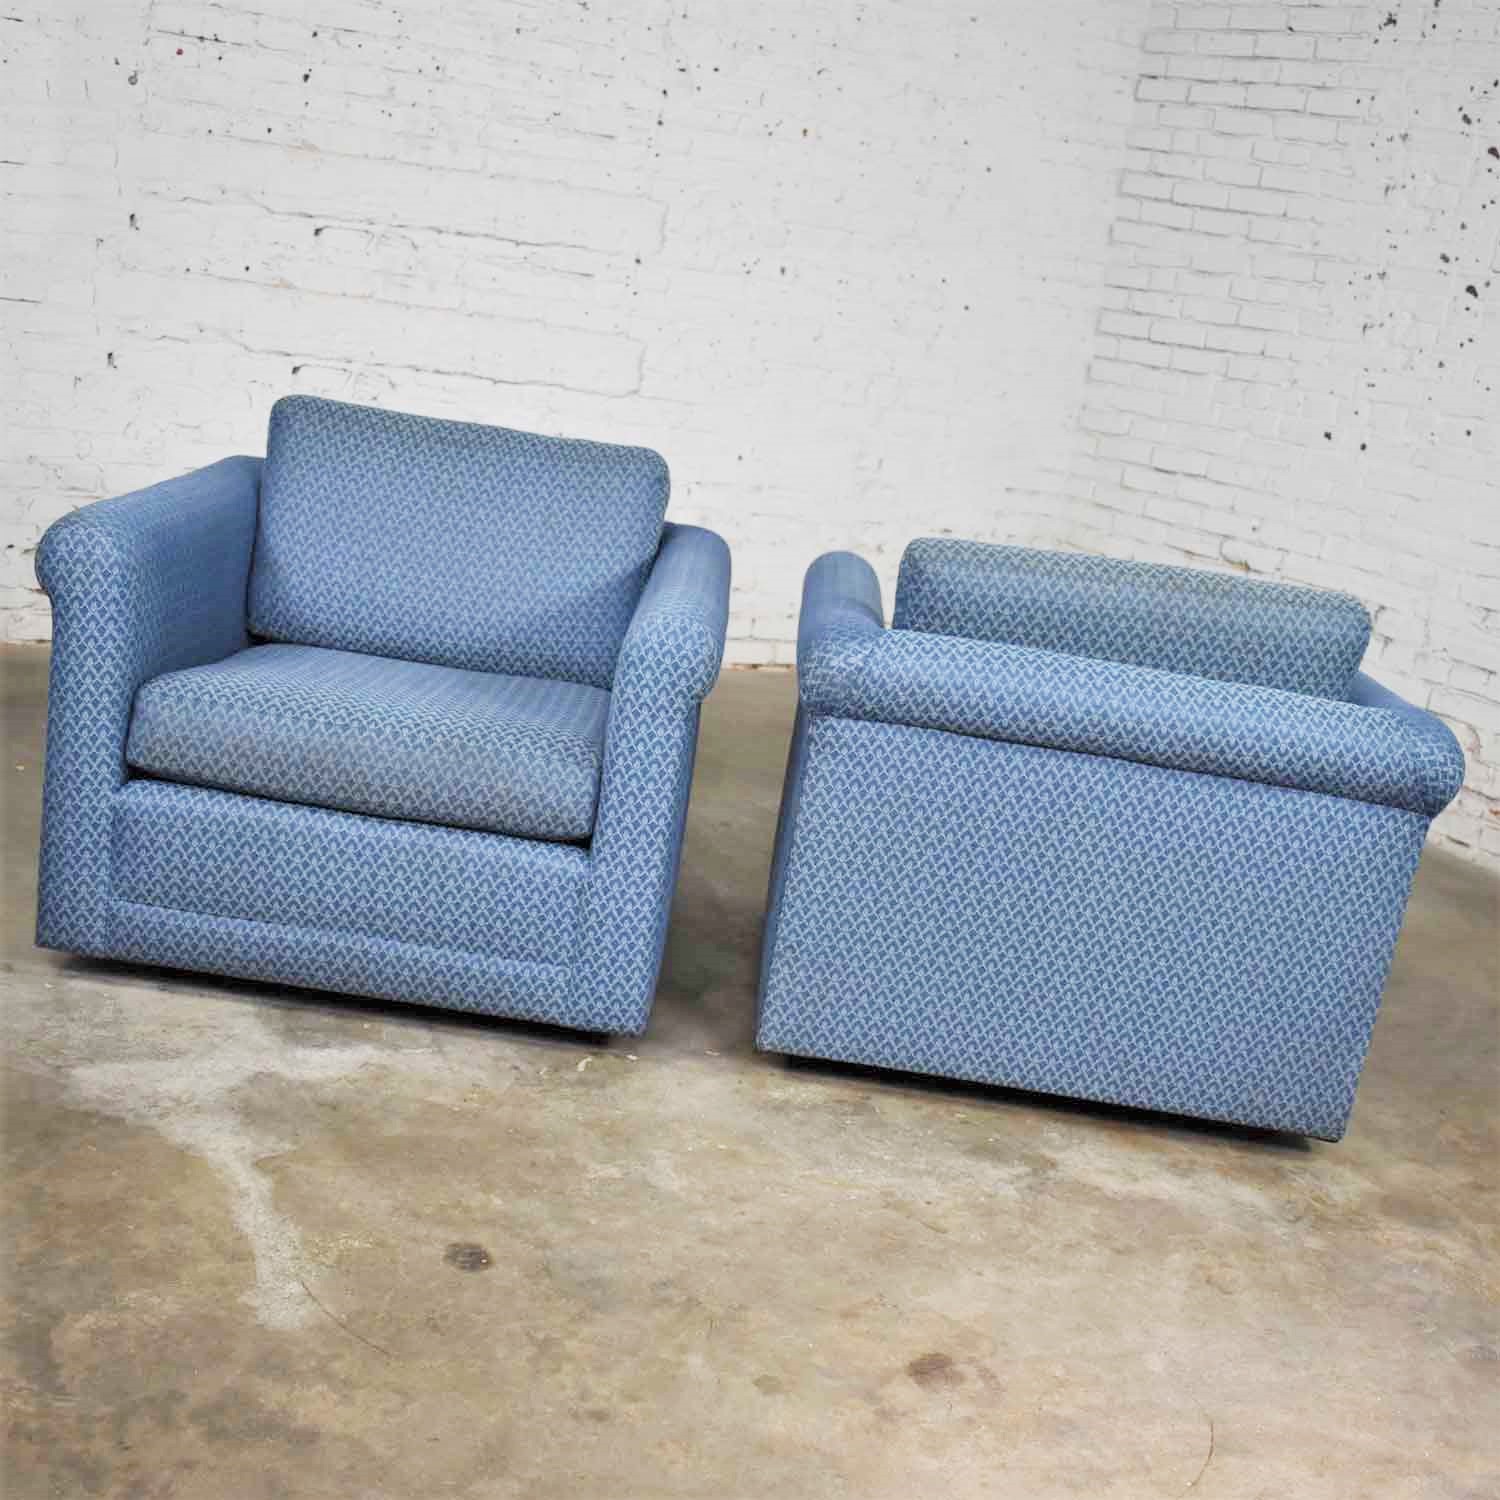 Pair of Vintage Rolled Arm Tuxedo Style Cube Club Chairs Art Deco Hollywood Regency Style